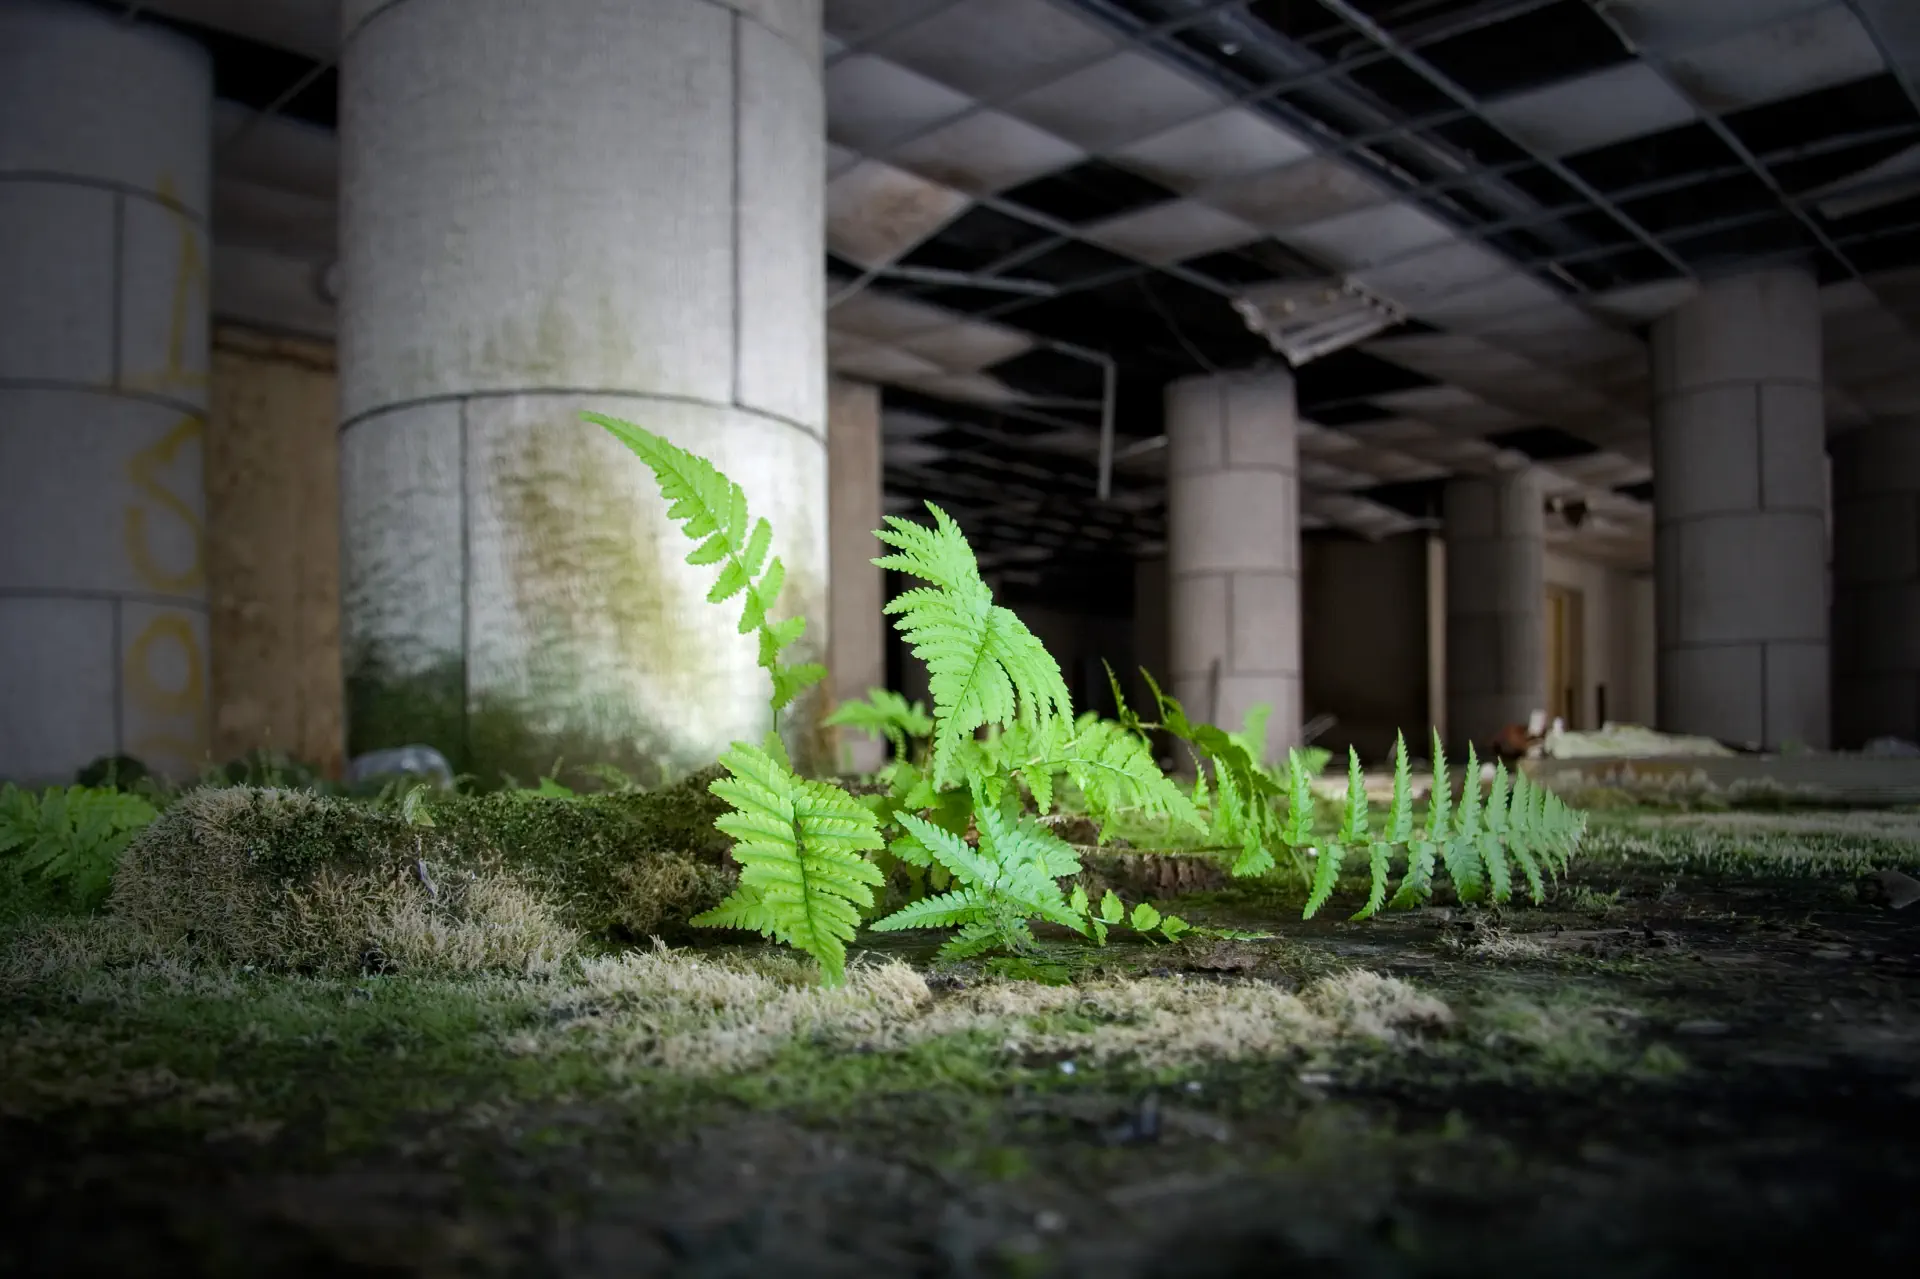 A fern grows in the hall of a hospital, at the base of a column.